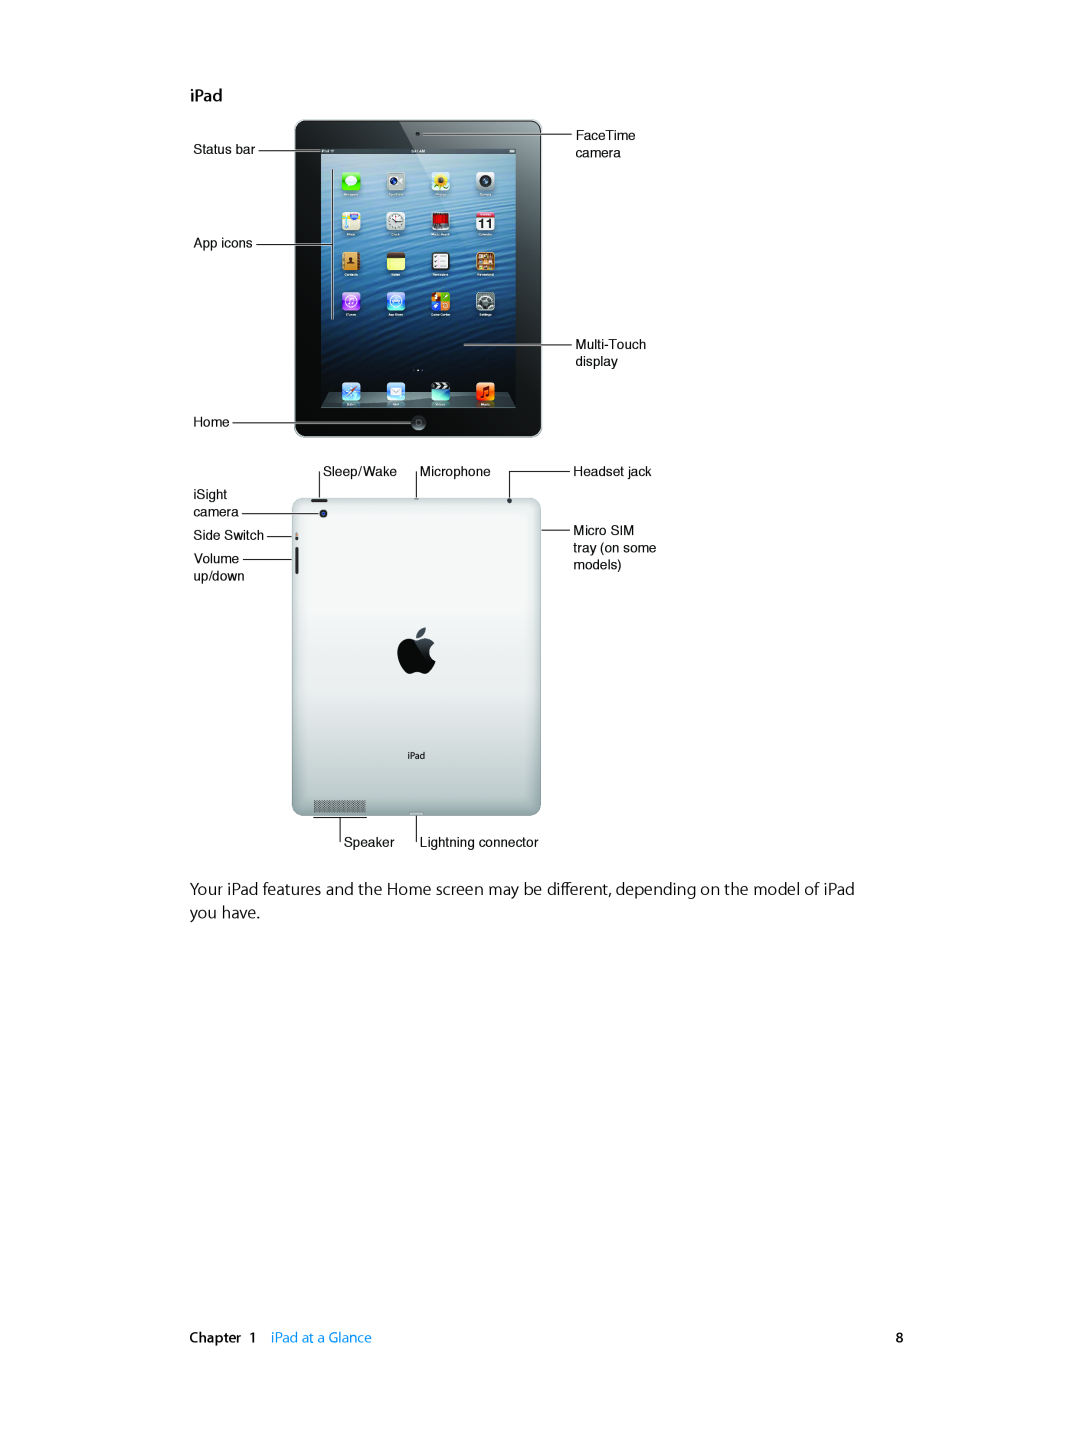 Apple MD539LL/A manual iPad at a Glance, Status bar App icons Home Sleep/Wake iSight camera Side Switch, Volume up/down 